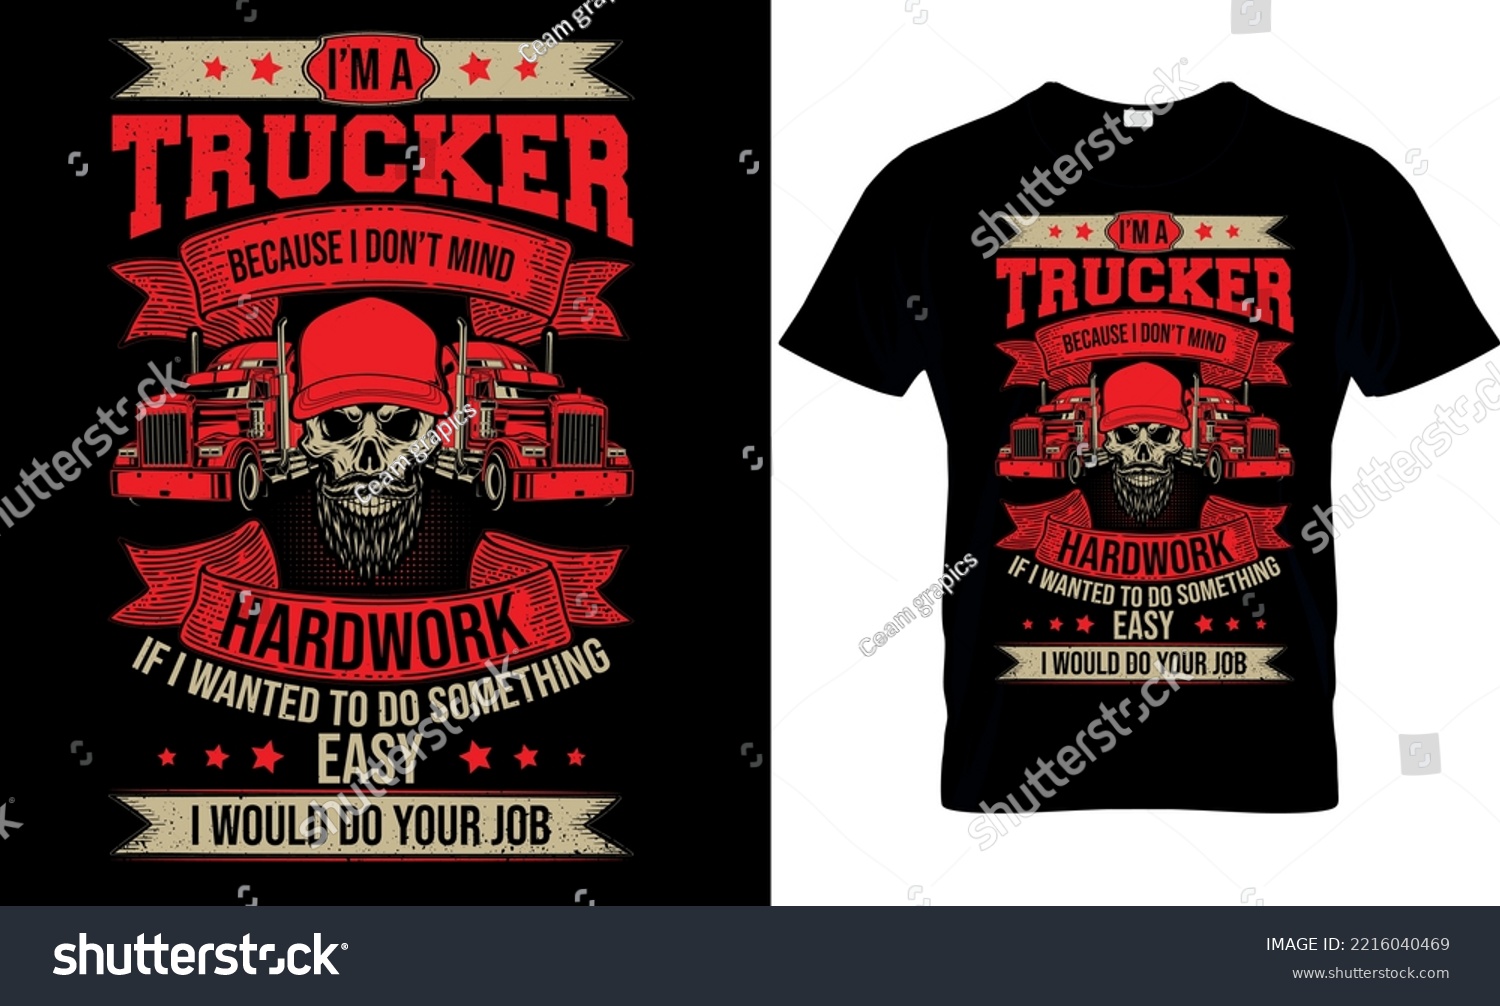 SVG of I'M A TRUCKER BECAUSE I DON'T MIND HARDWORK IF I WANTED TO DO SOMETHING EAST I WOULD DO YOUR JOB svg